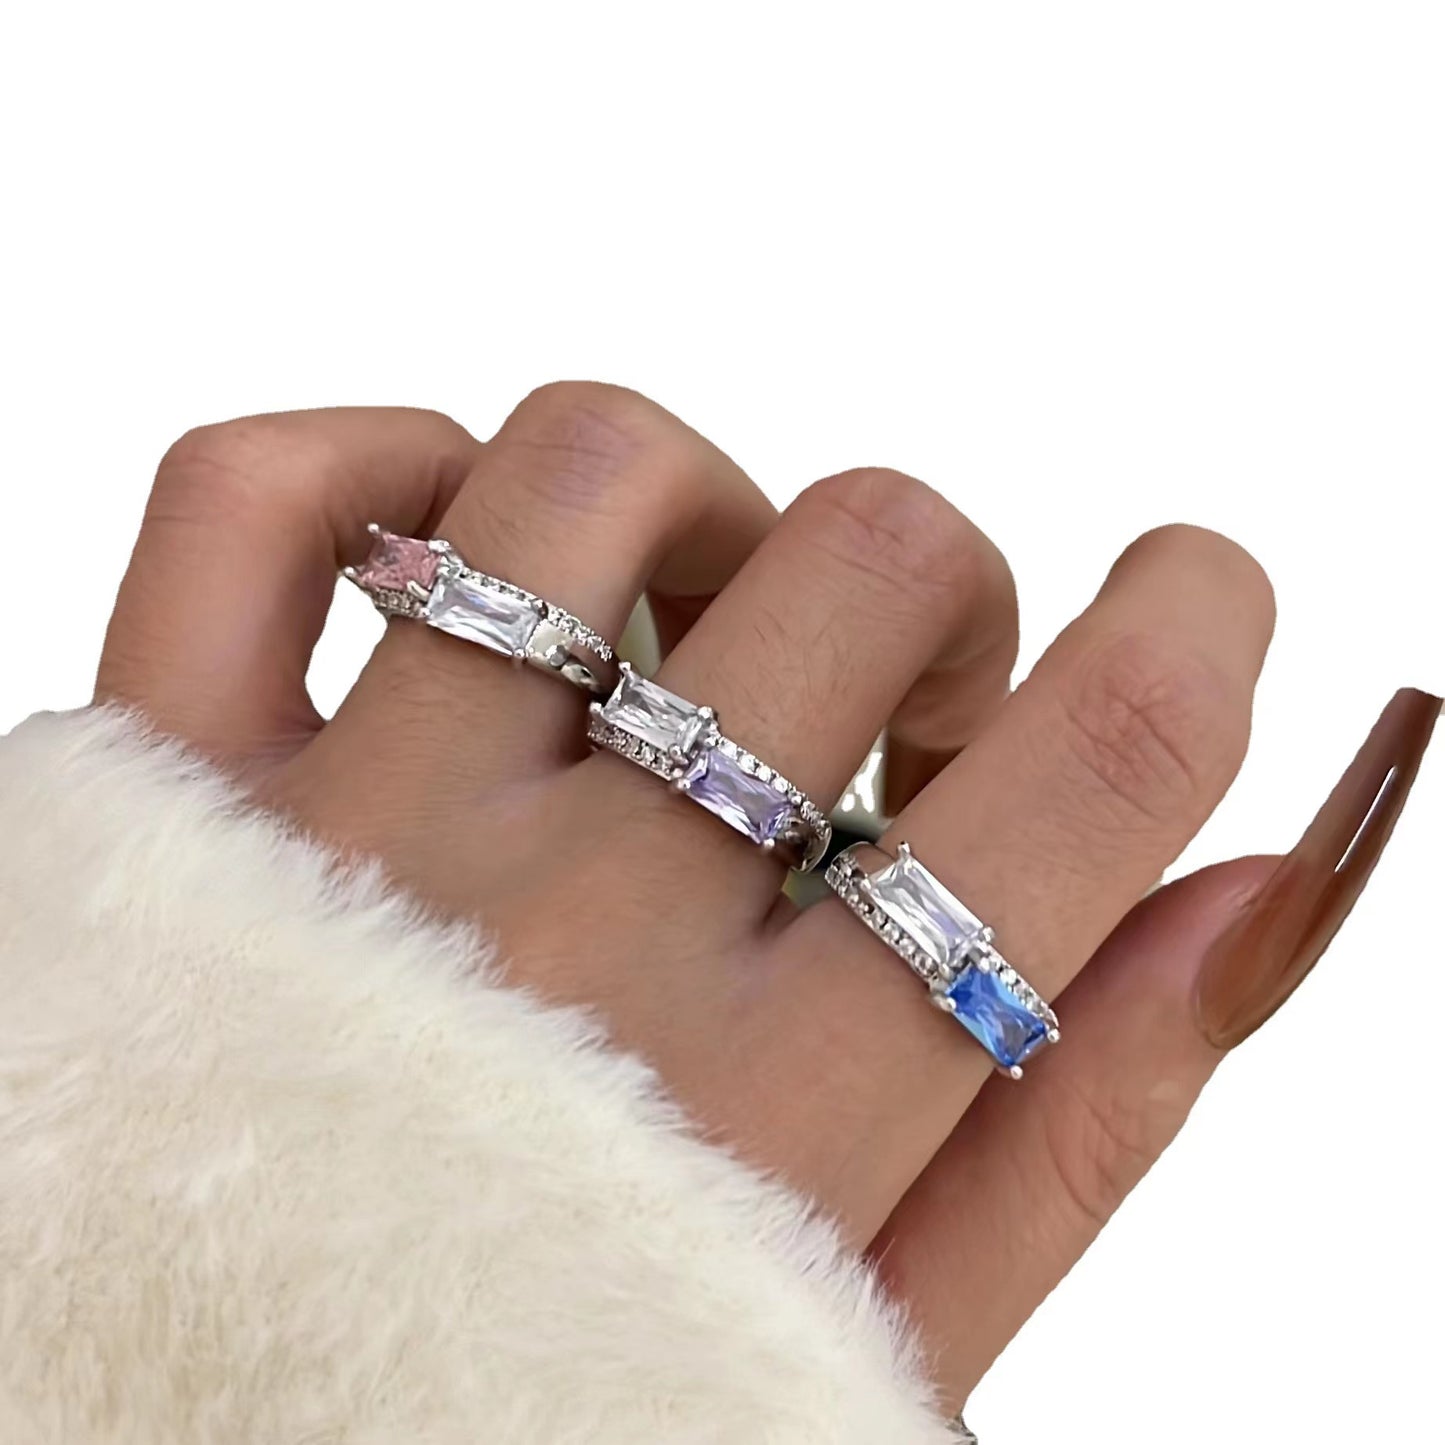 A niche design with gemstone inlaid rings for women with a high-end feel, irregular geometric index finger ring recommended by bloggers